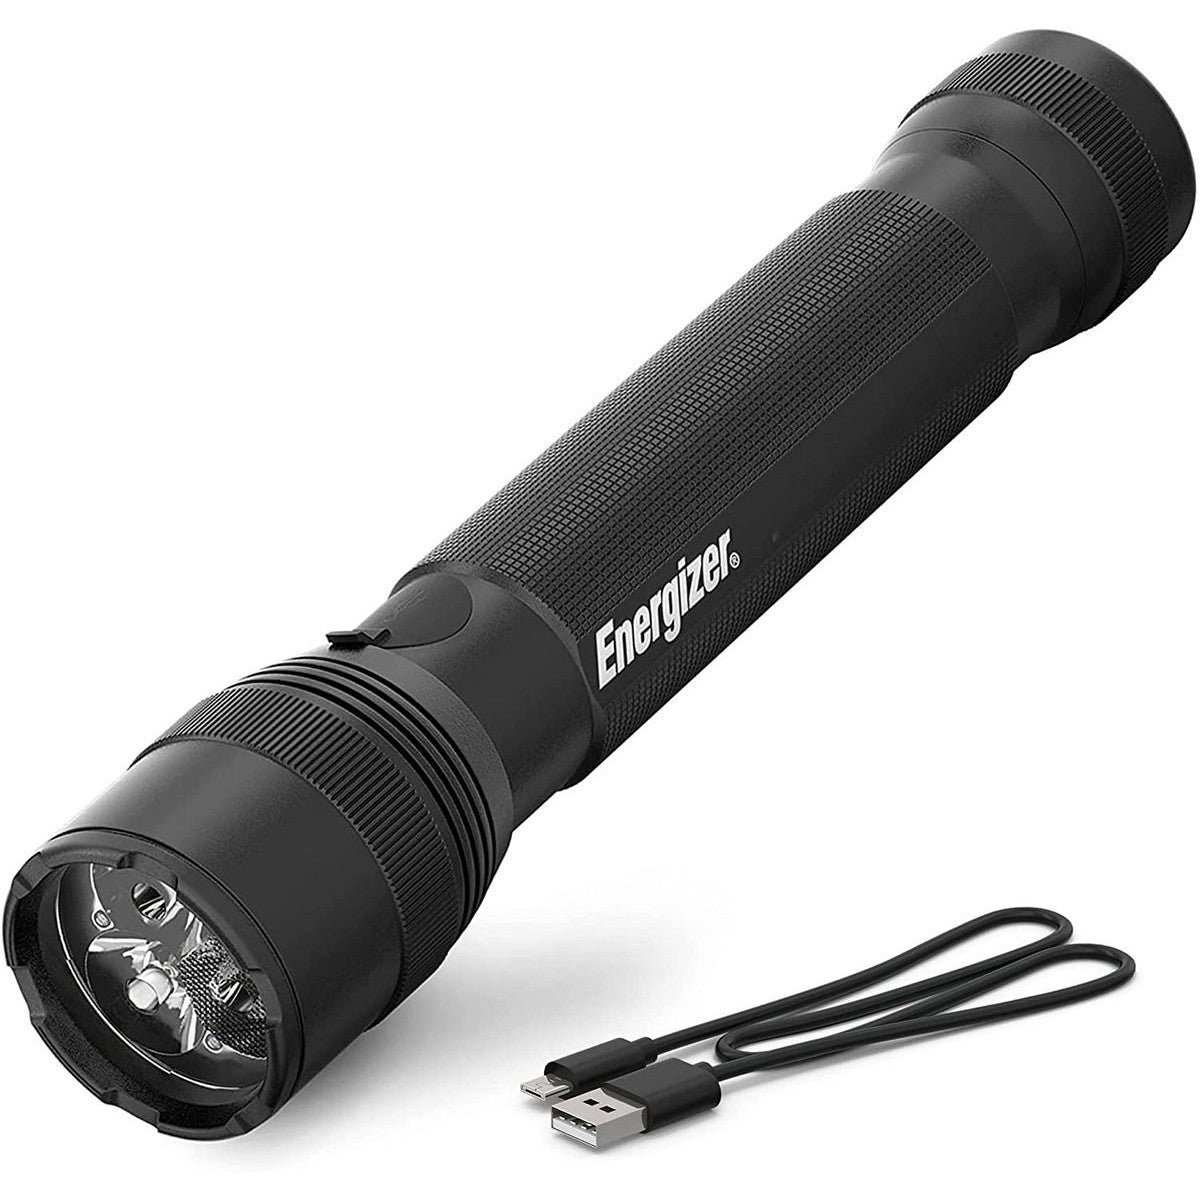 Flashlight Torch Rechargeable 1200lm Tactical Energizer